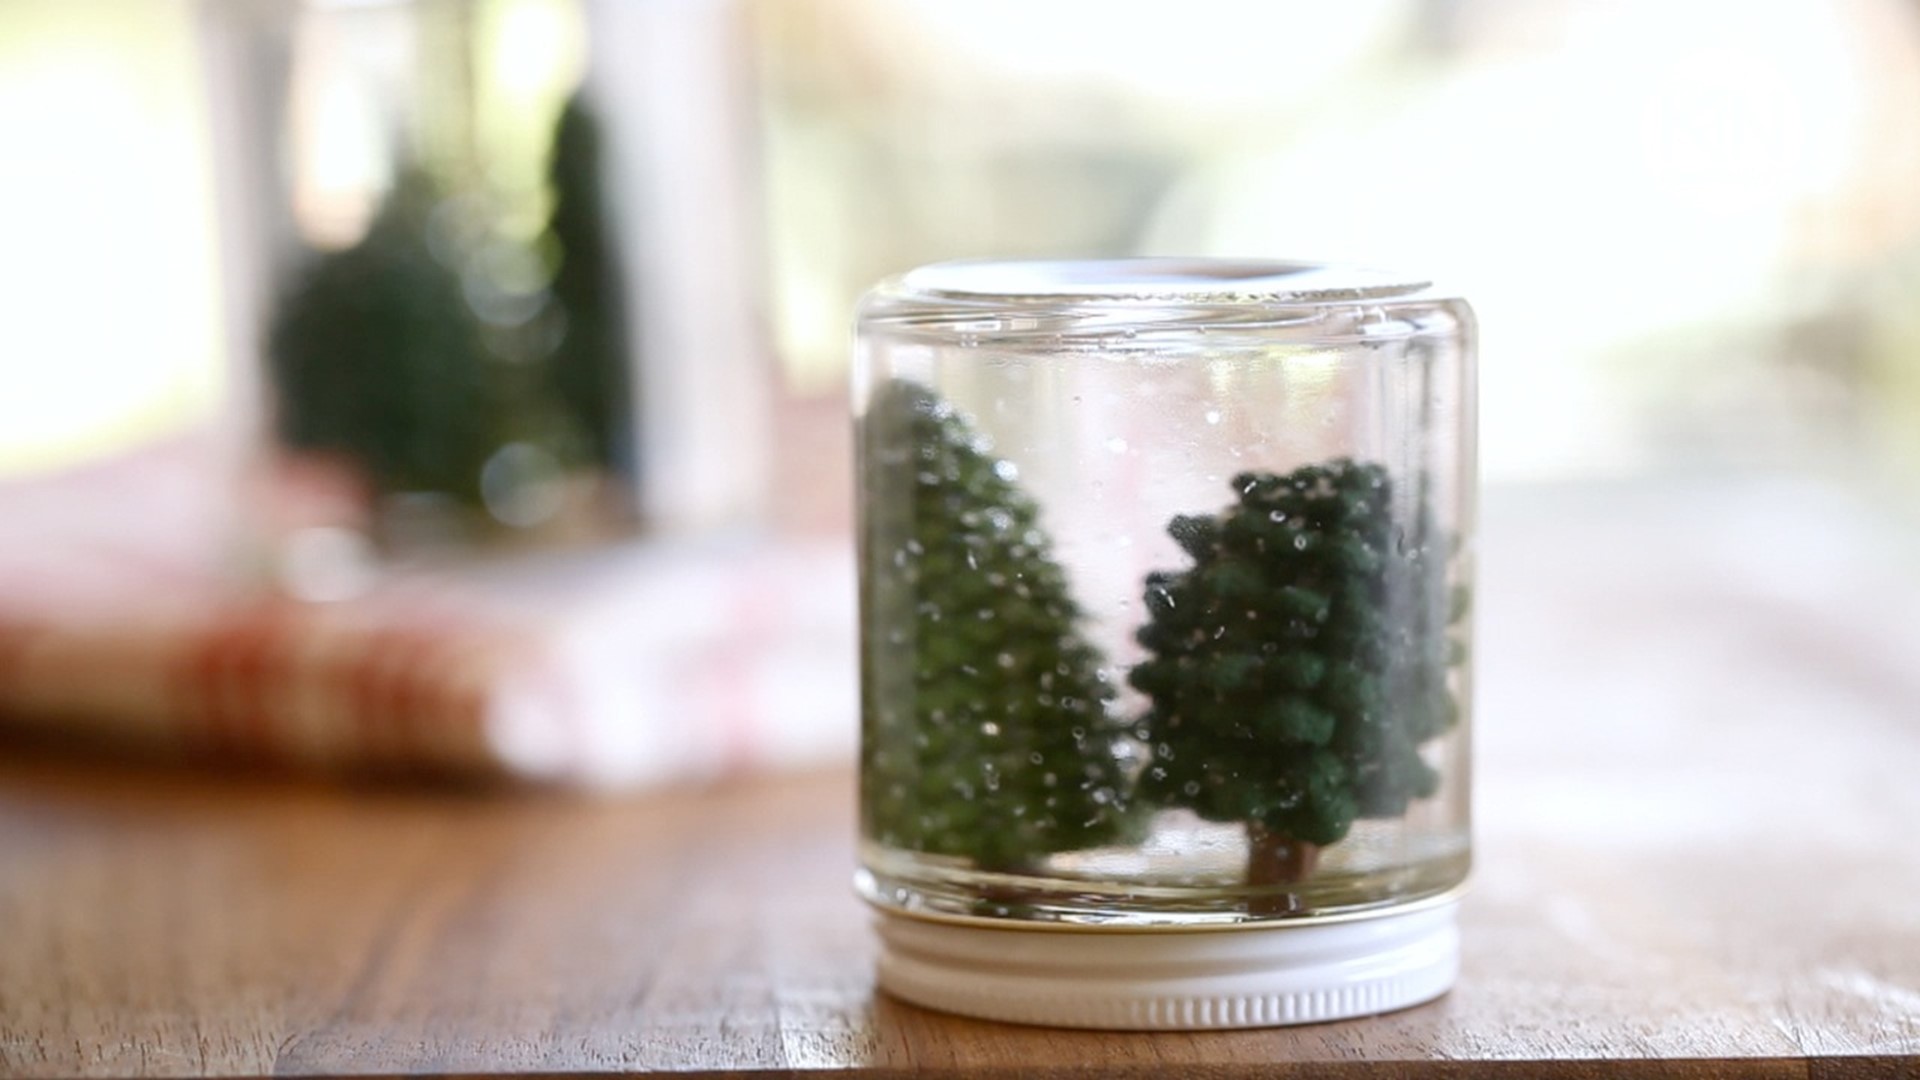 Let it snow! Even if you live in a warmer climate you can create flurries by making your own snow globes. Your kiddos will love designing their own snowscapes. Our Kin Parents Producer Robert Mahar compiled this project and recommends raiding your recycli